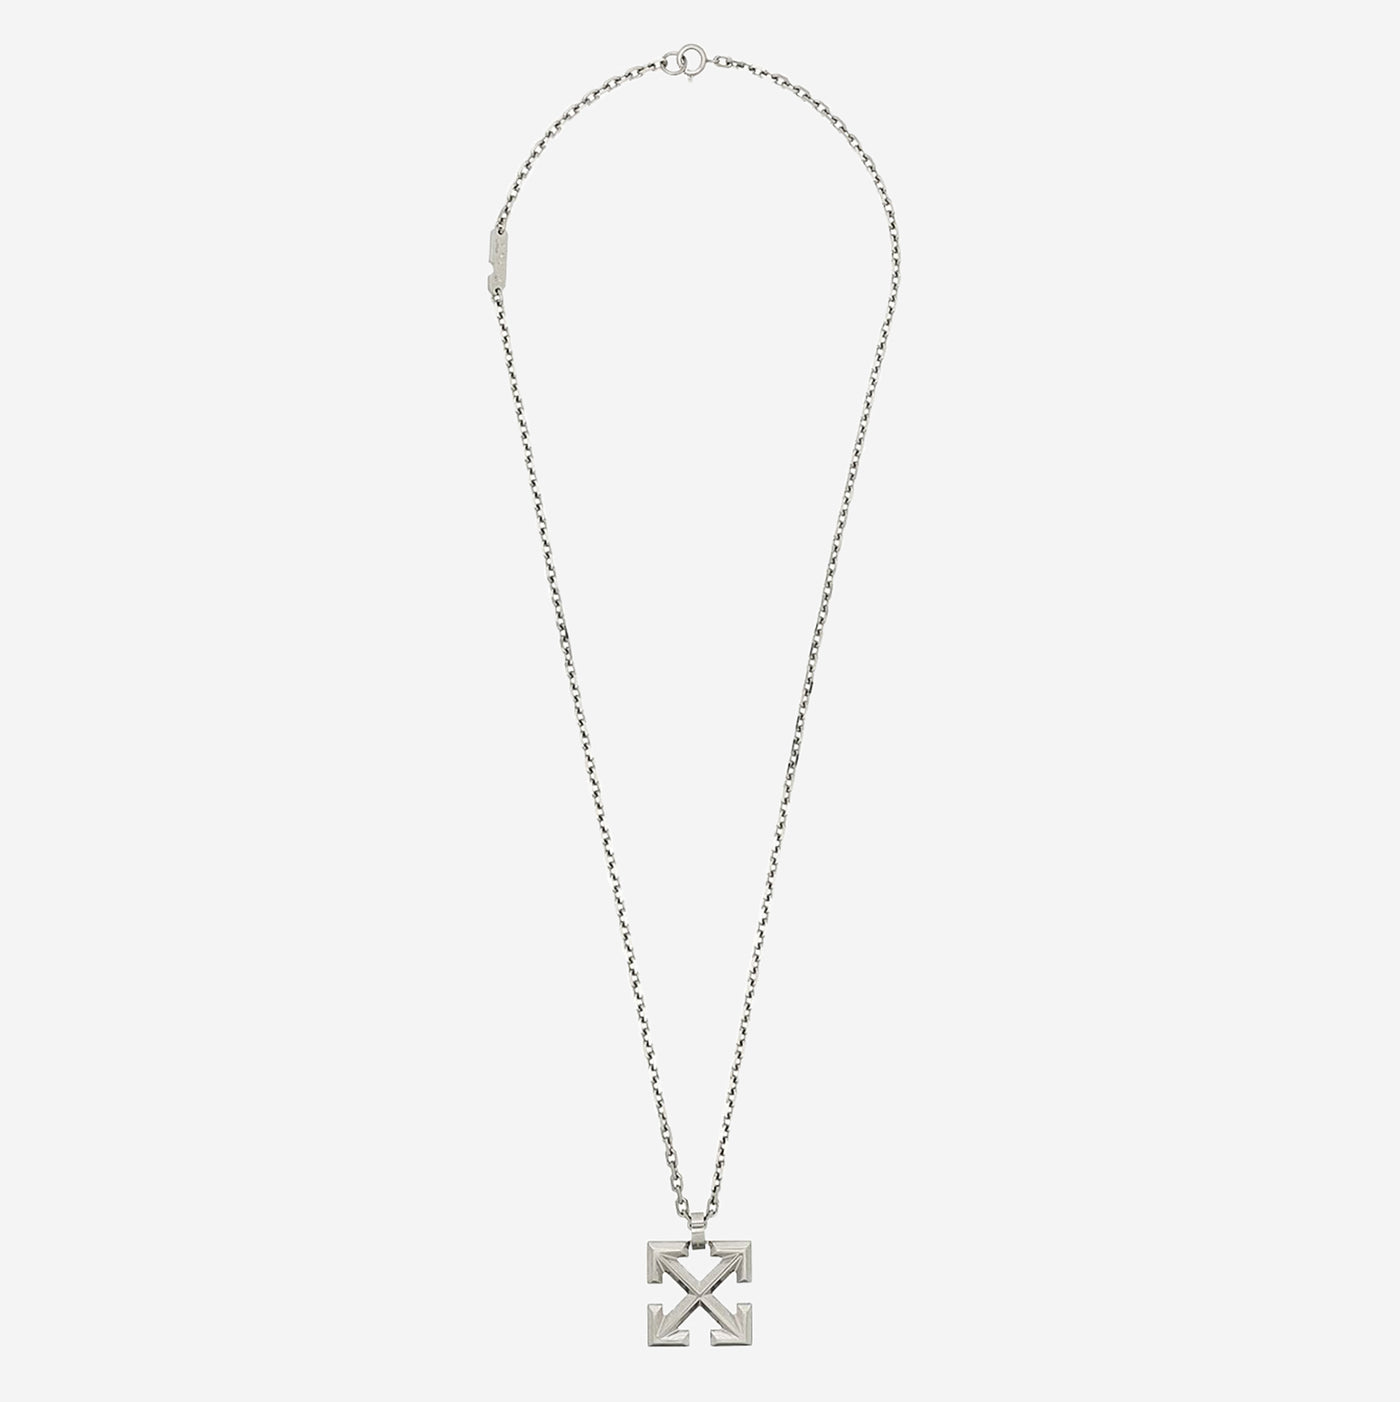 Off-White Arrow Necklace